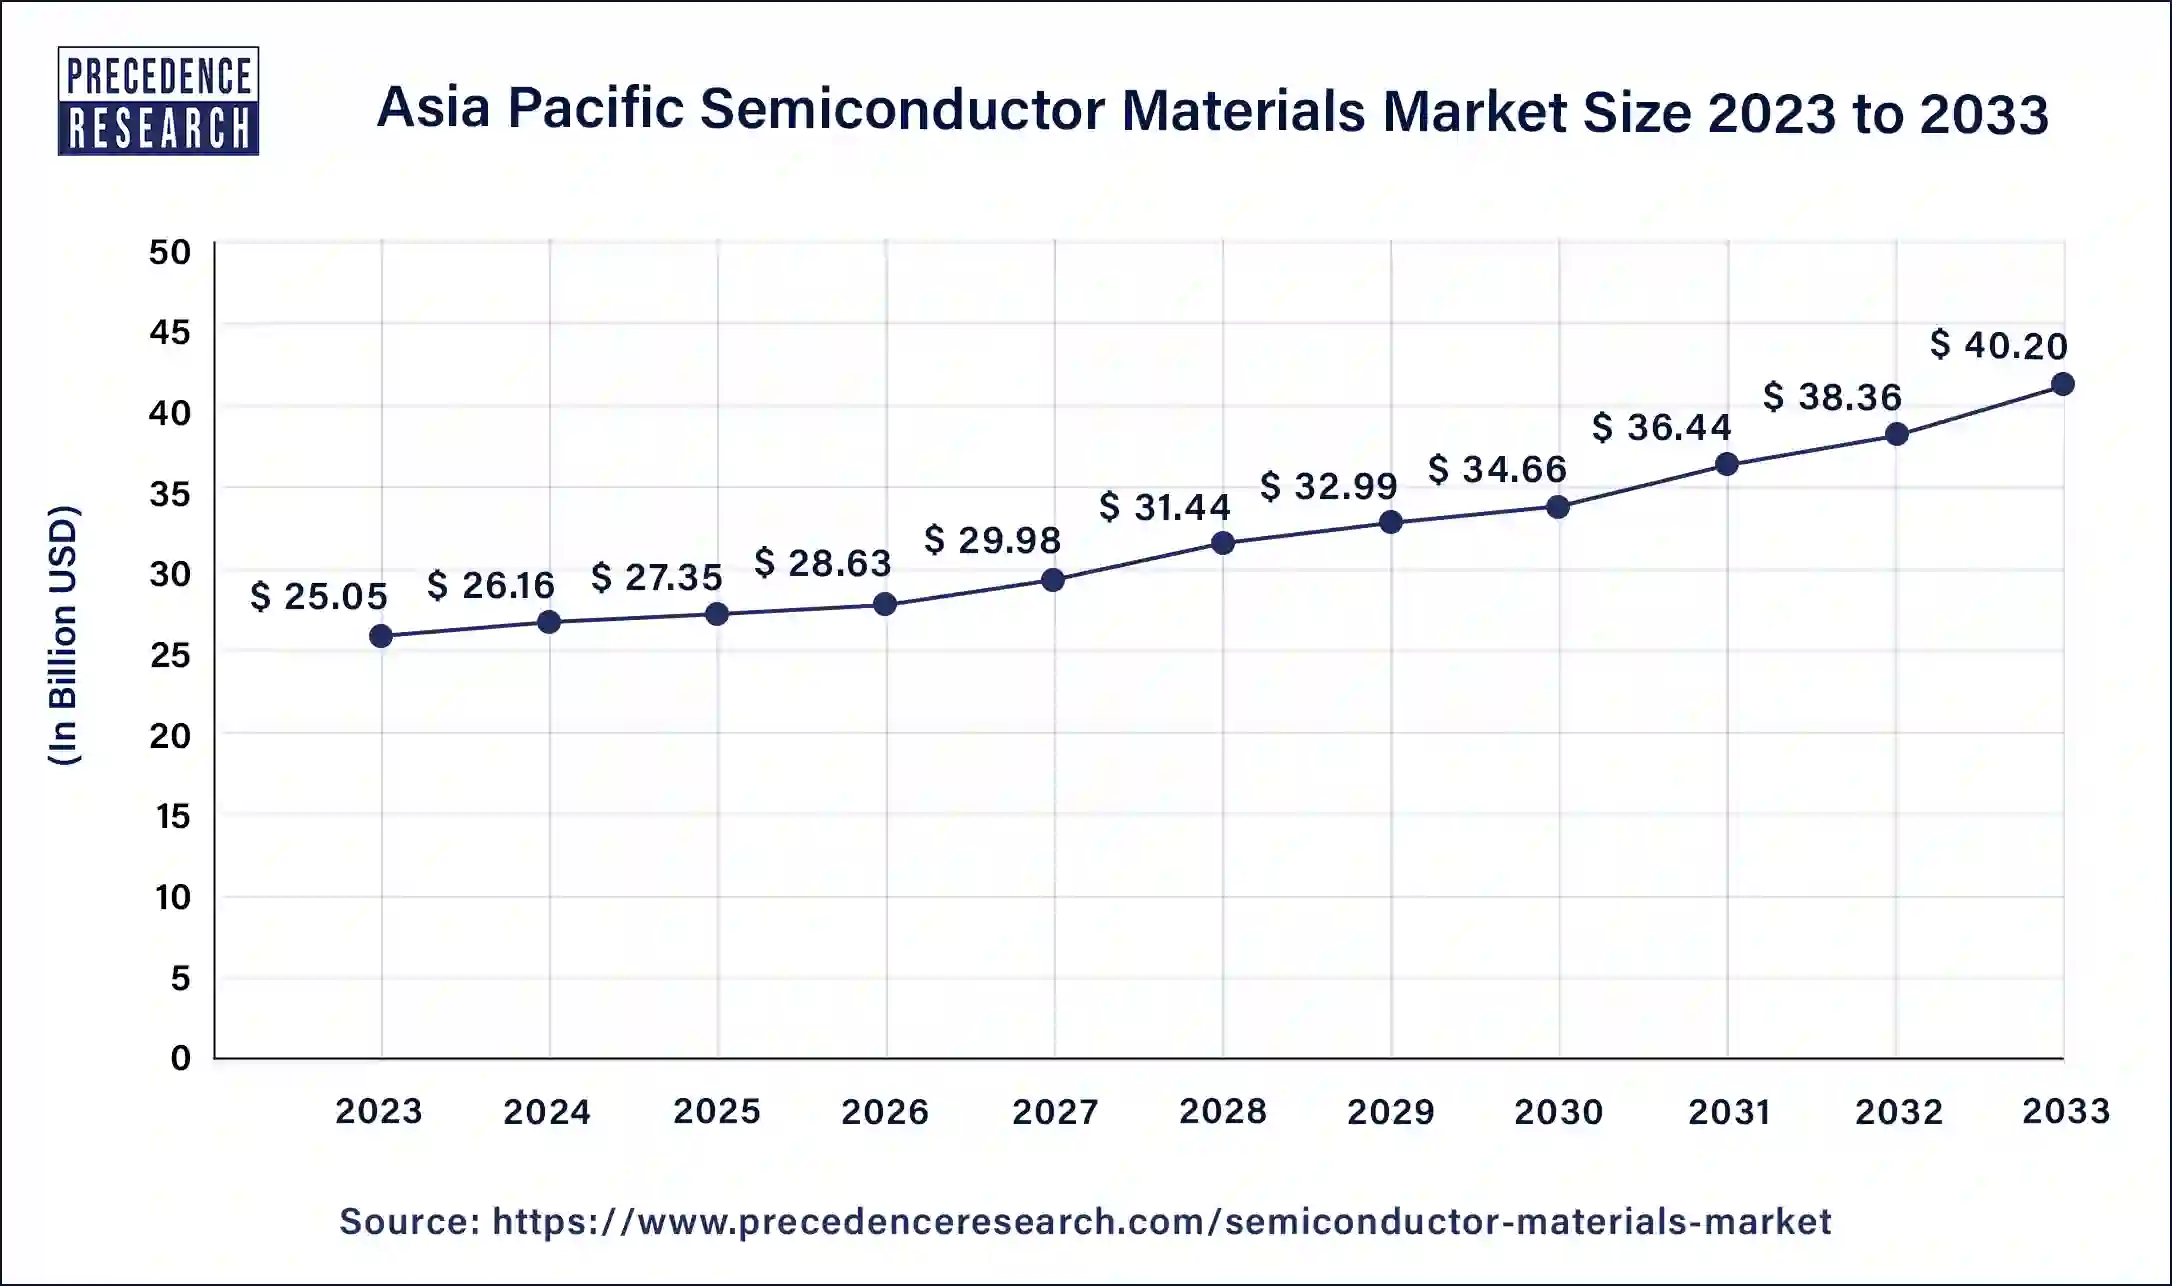 Asia Pacific Semiconductor Materials Market Size 2024 to 2033